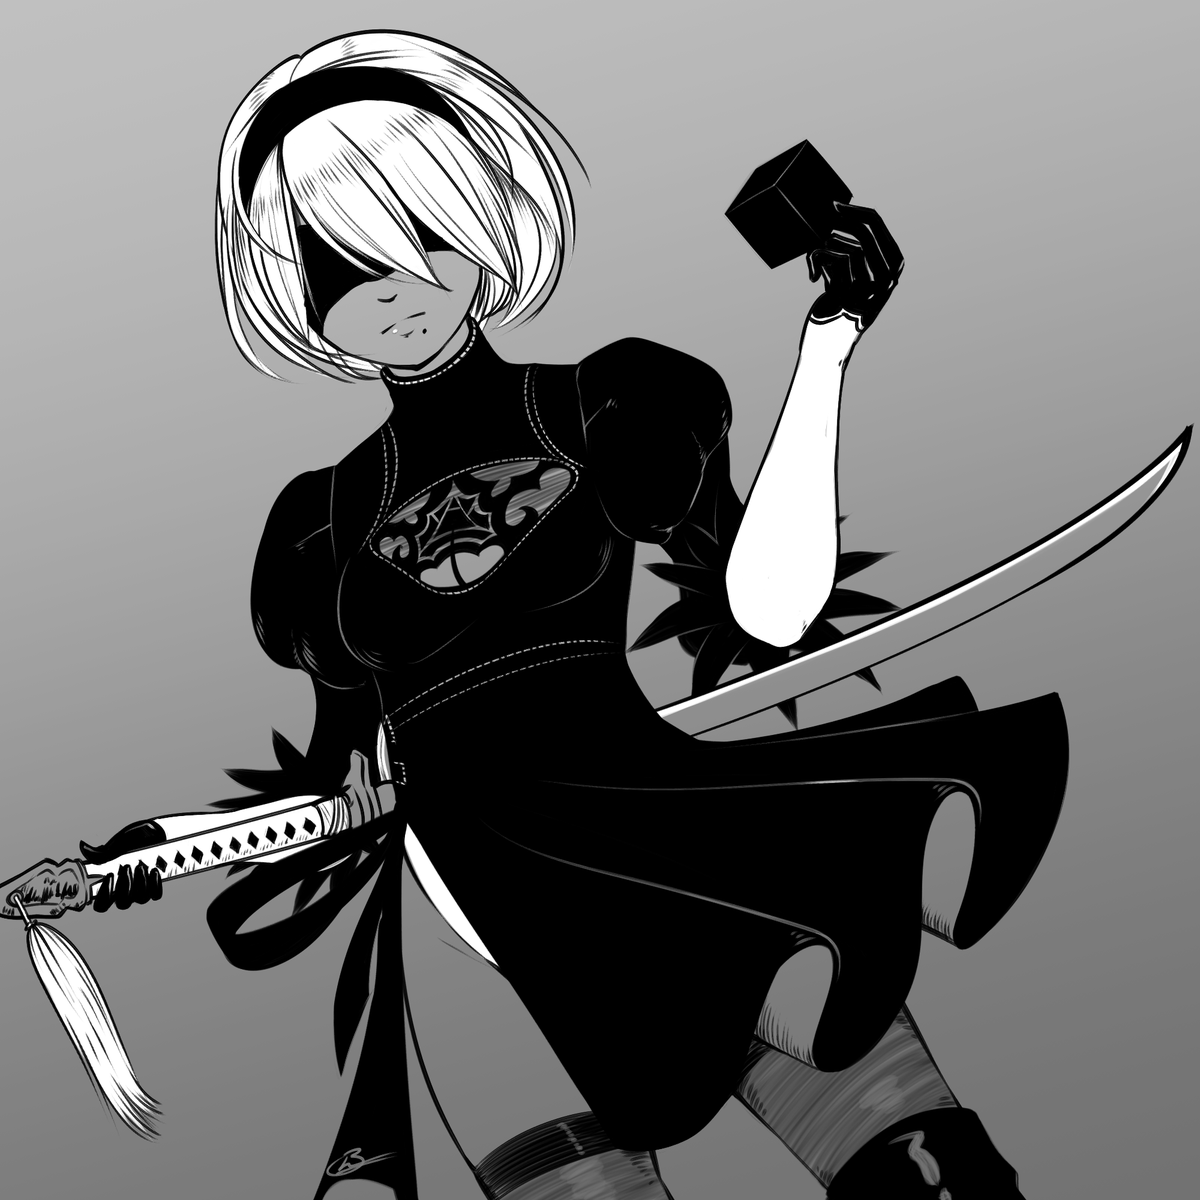 More Toobs.
(3) 2Beans + (1) First fan art from WAY before I played the game
#2B #NieRAutomata #ニーアオートマタ 